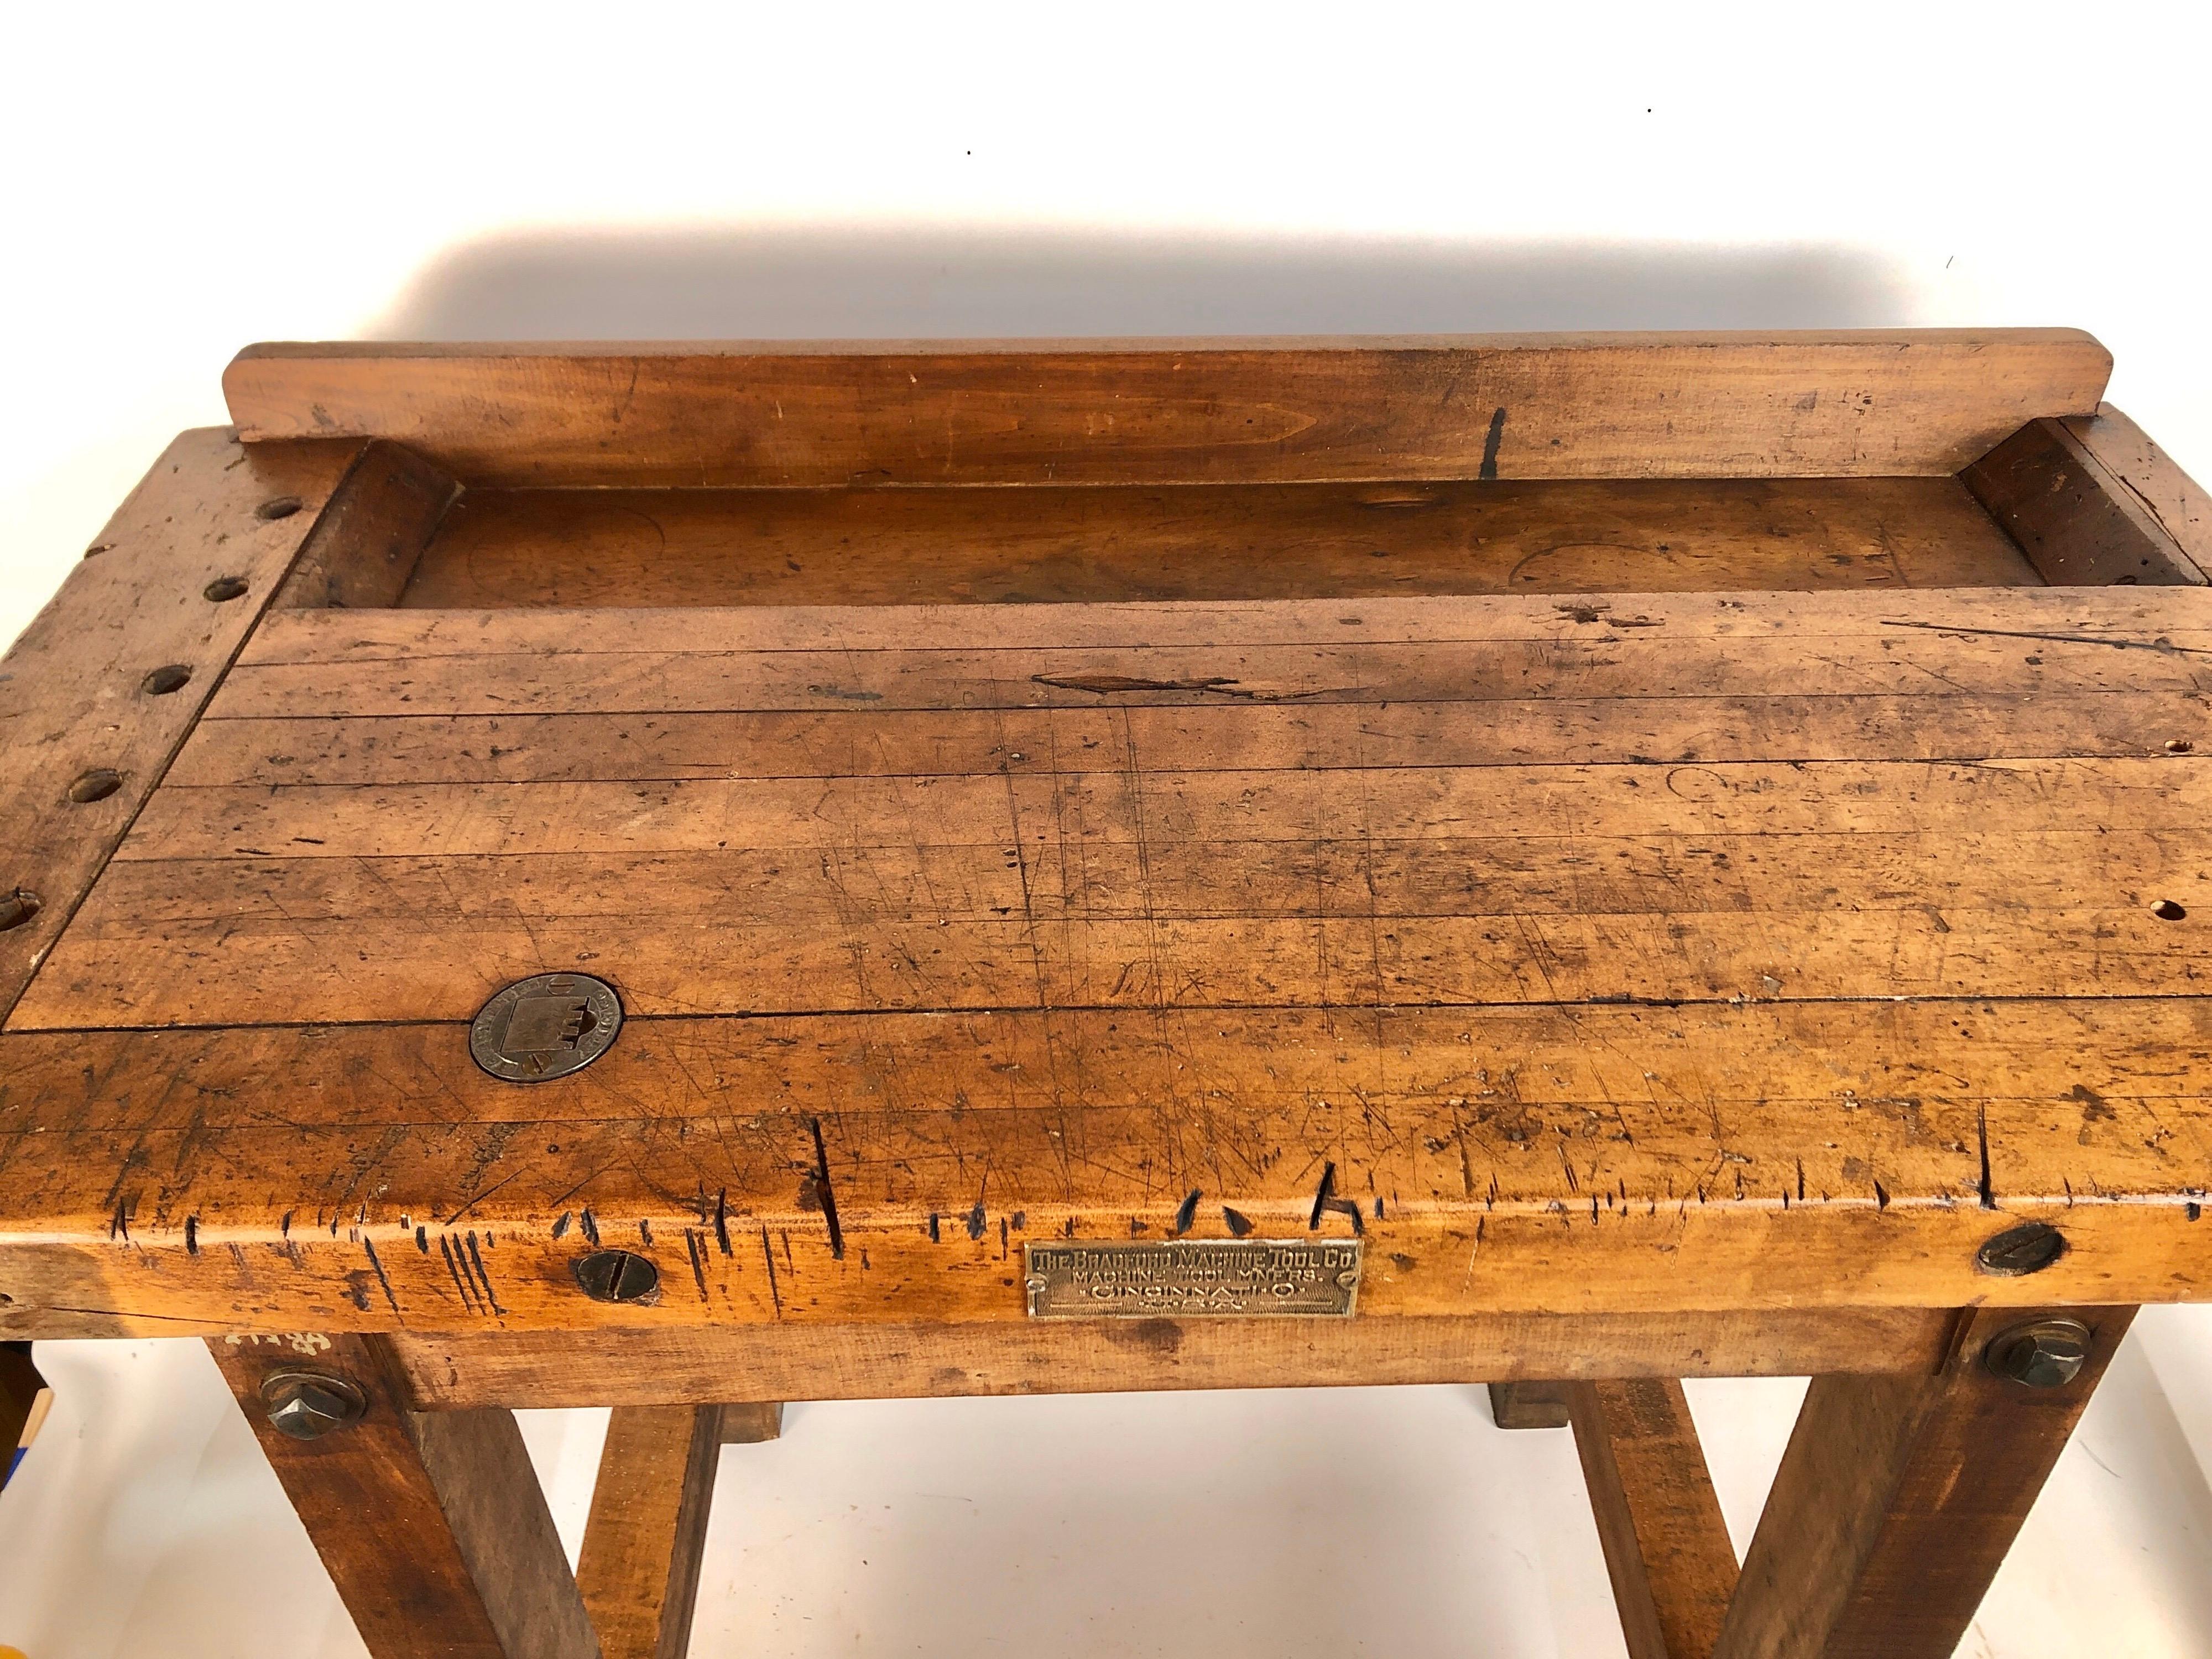 Hand-Crafted Antique Carpenters Wooden Work Table Industrial Bradford Machine Tool Co. Ohio.